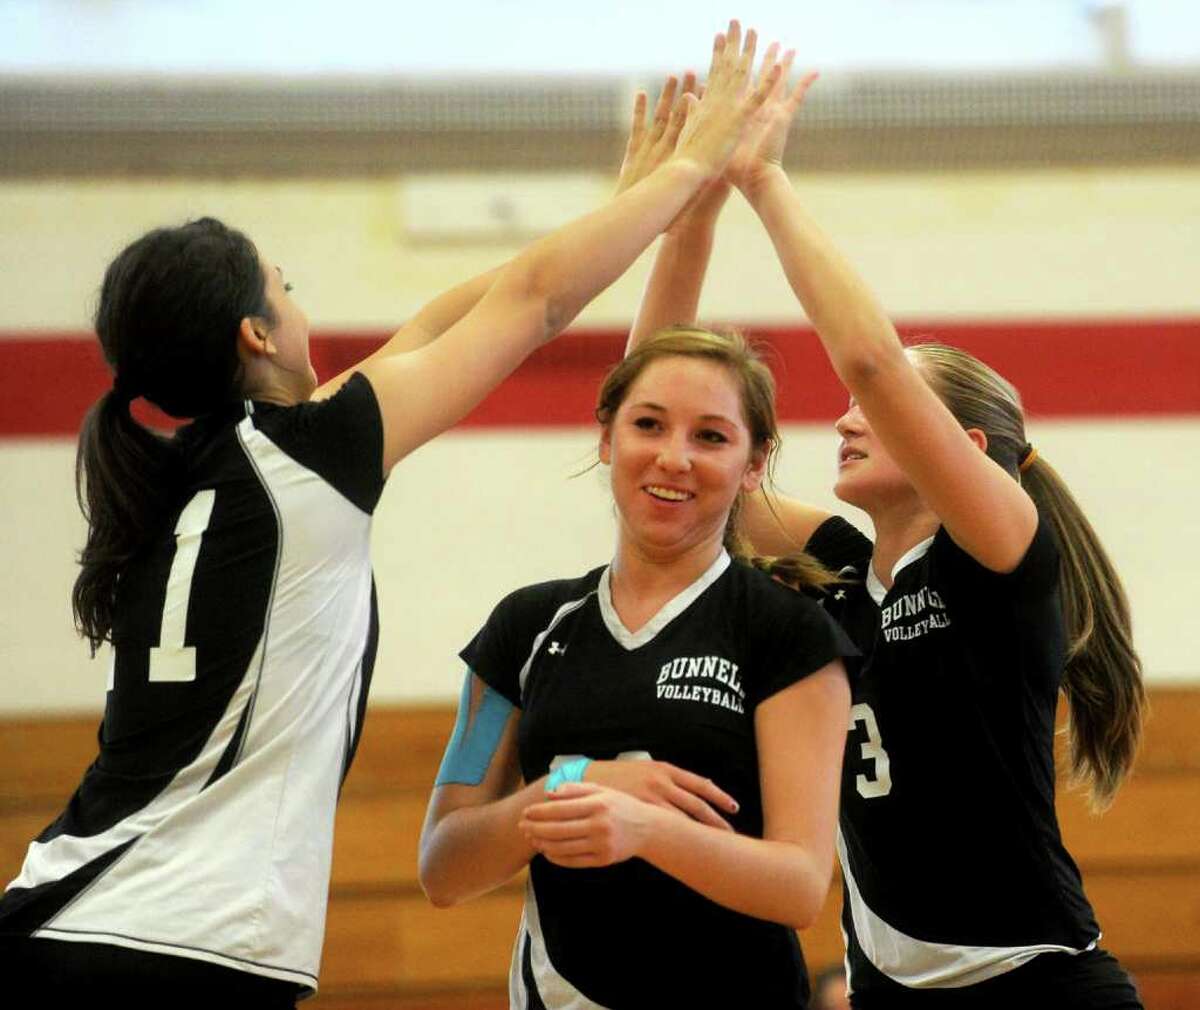 Members of the Bunnell High School volleyball team high-five after earning a point during Wednesday's game at Stratford High School on September 22, 2010.